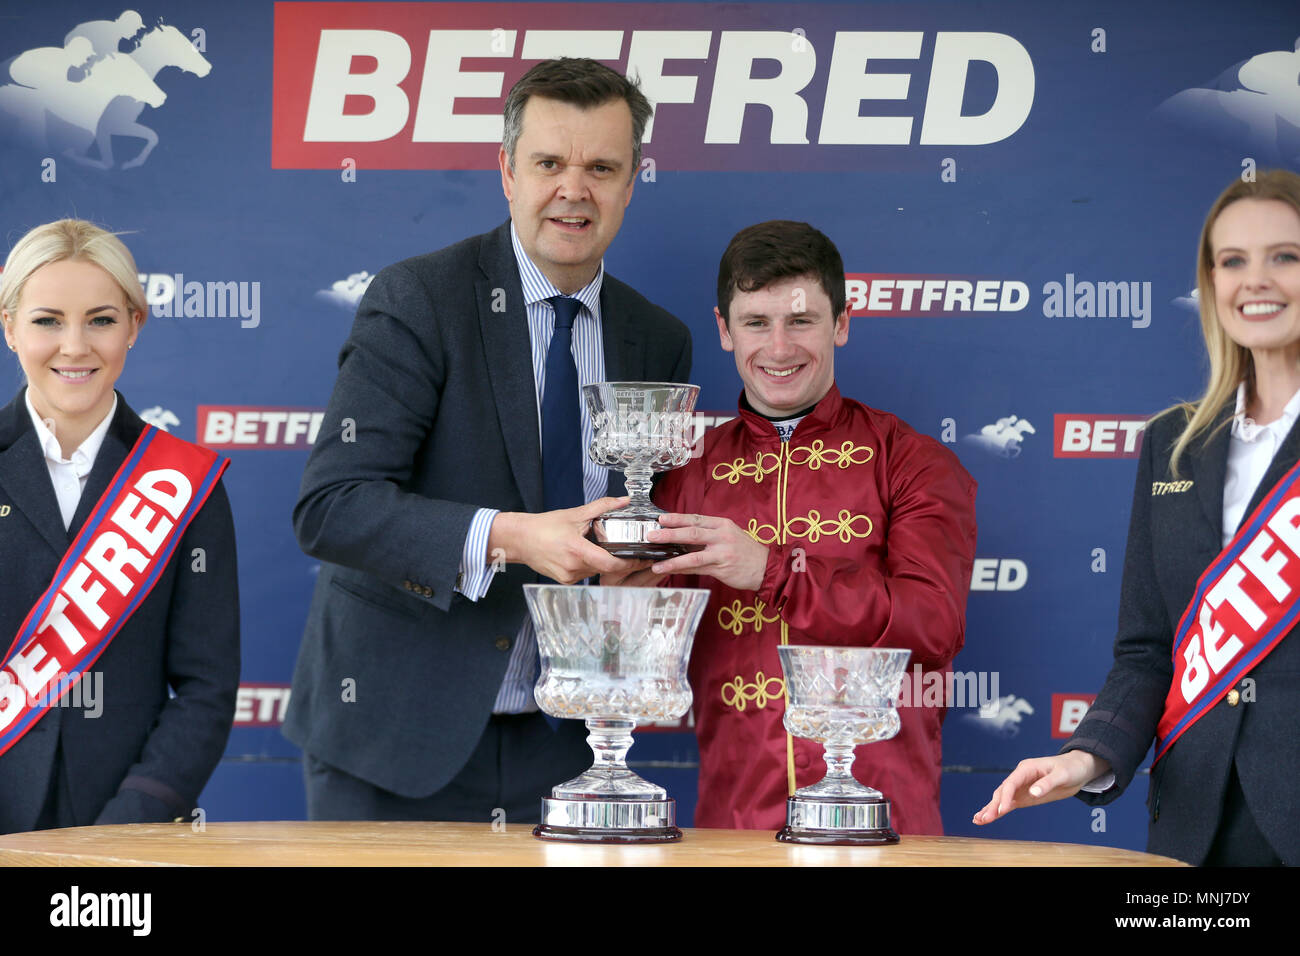 Oisin Murphy (right) poses with the trophy after winning the Betfred Dante Stakes onboard Roaring Lion during day two of the 2018 Dante Festival at York Racecourse. Stock Photo